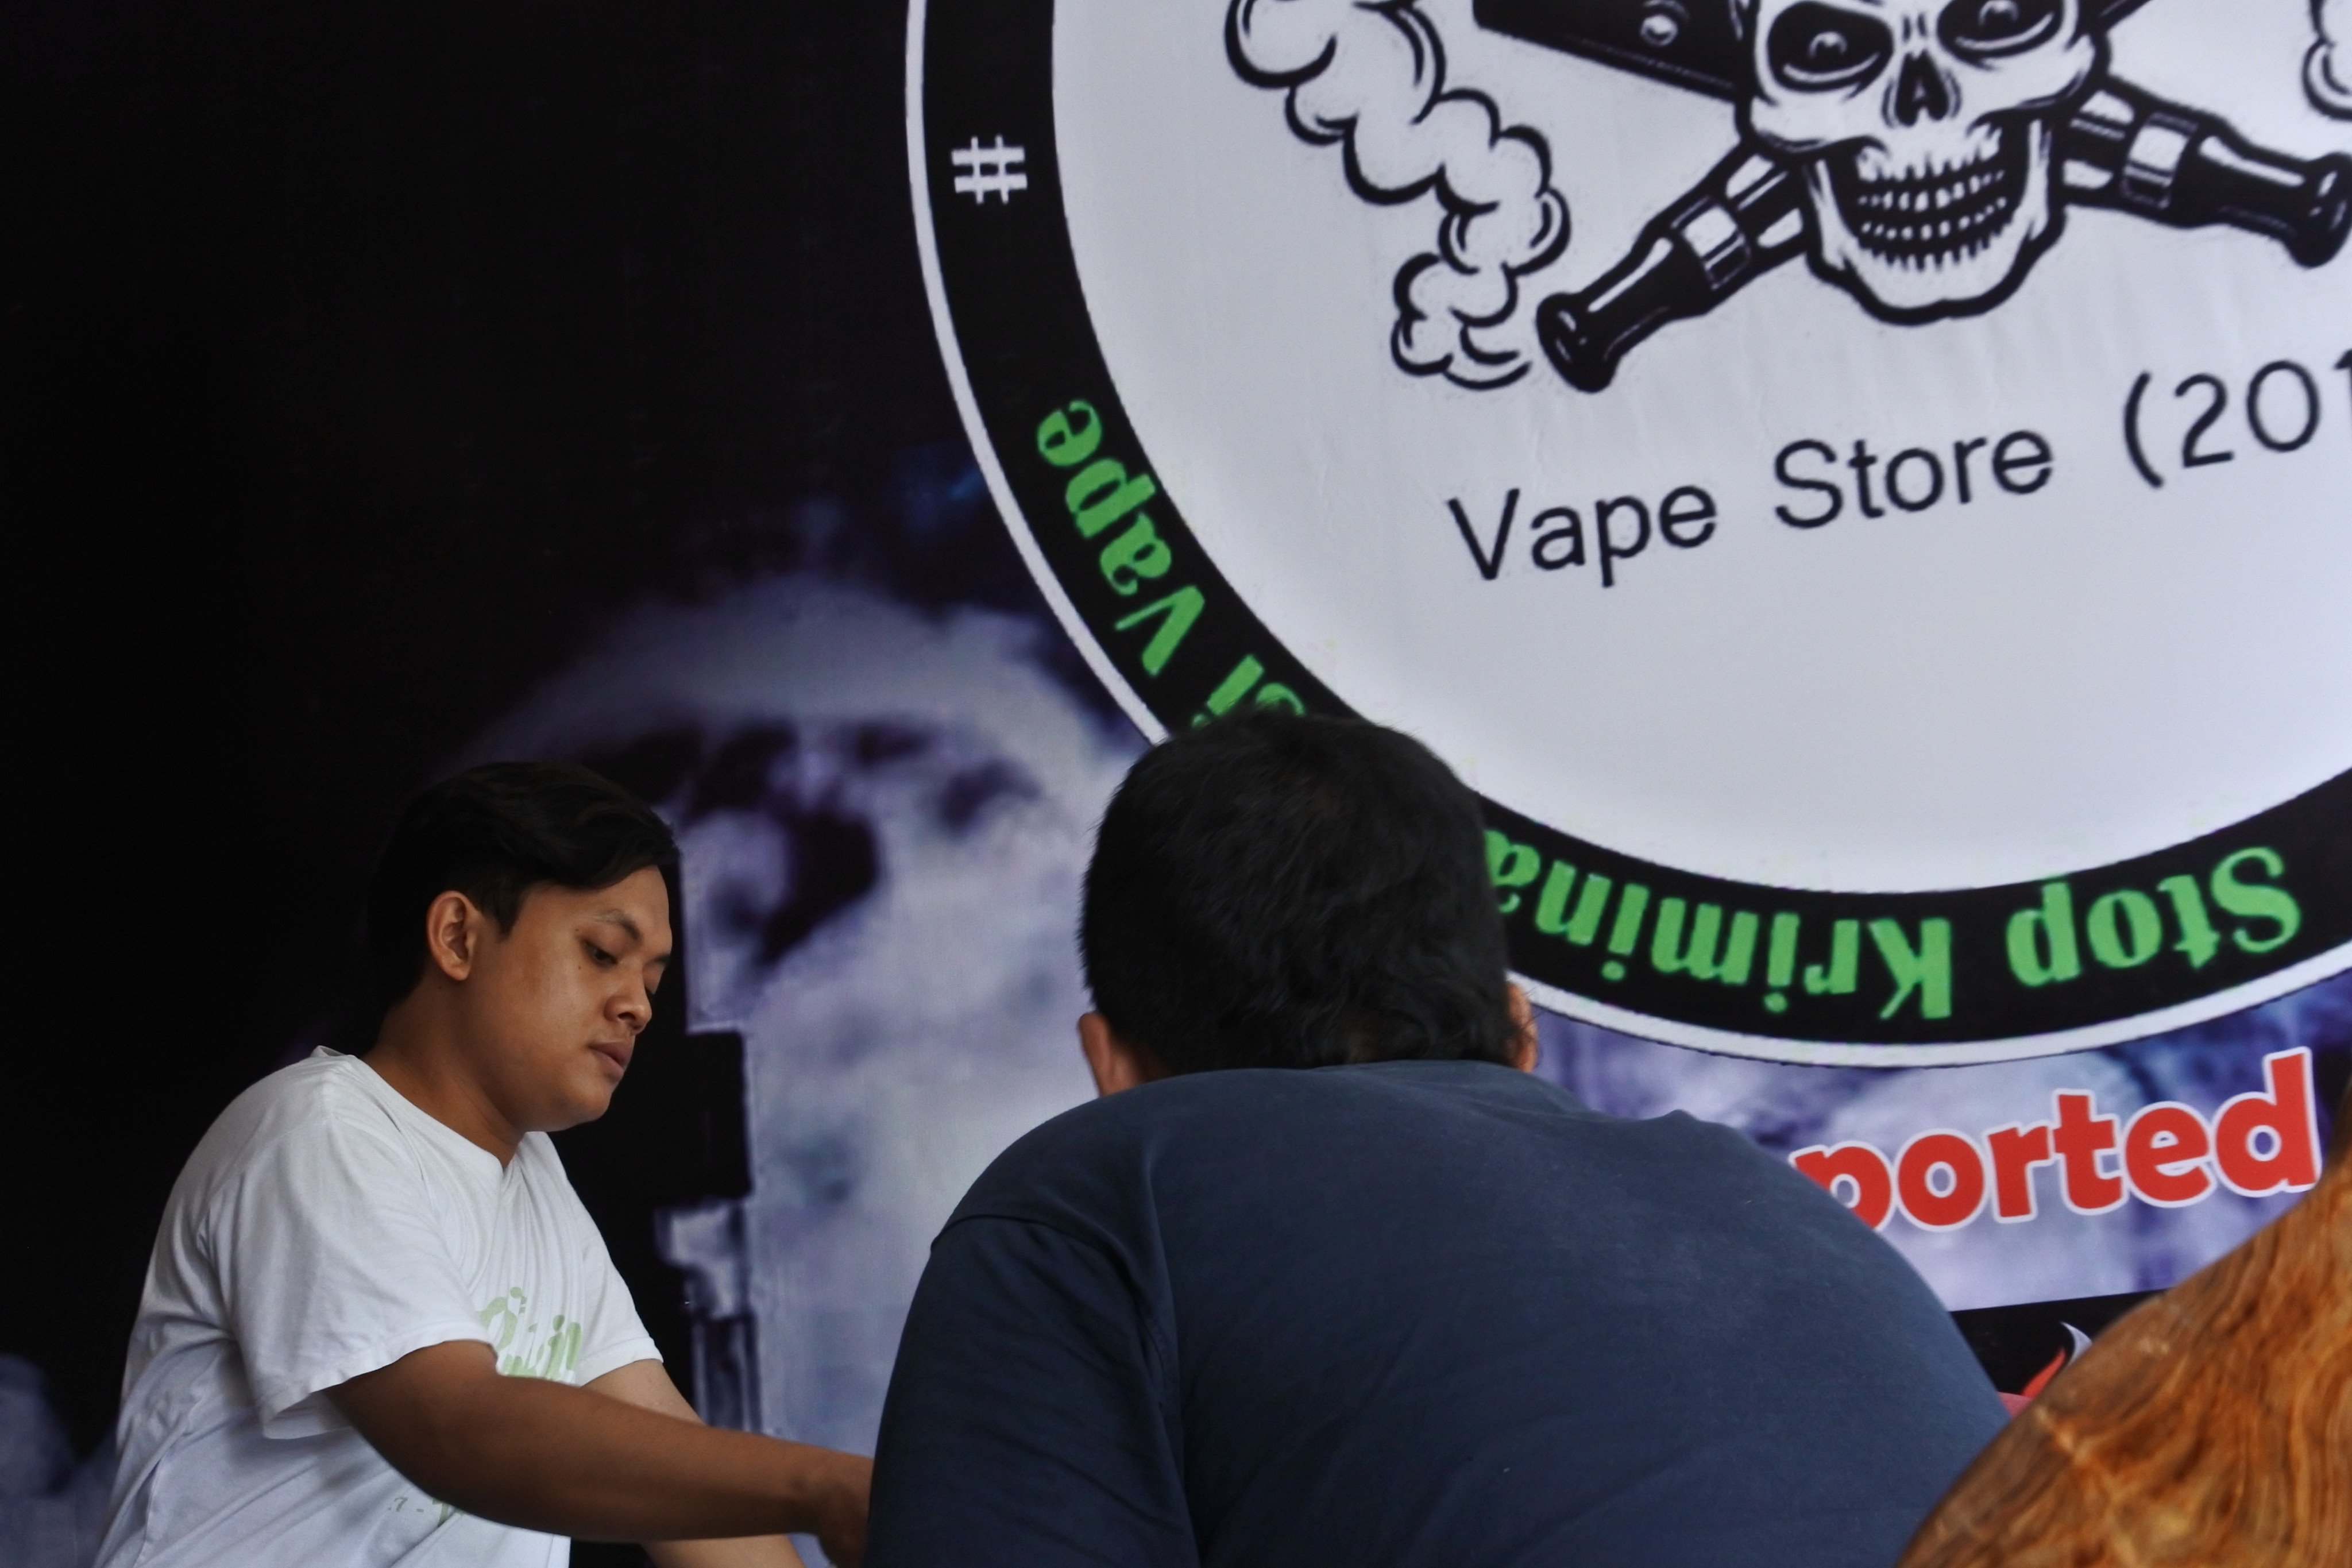 People at a vape and e-cigarette sales kiosk in Java, Indonesia. Photo: Shutterstock 